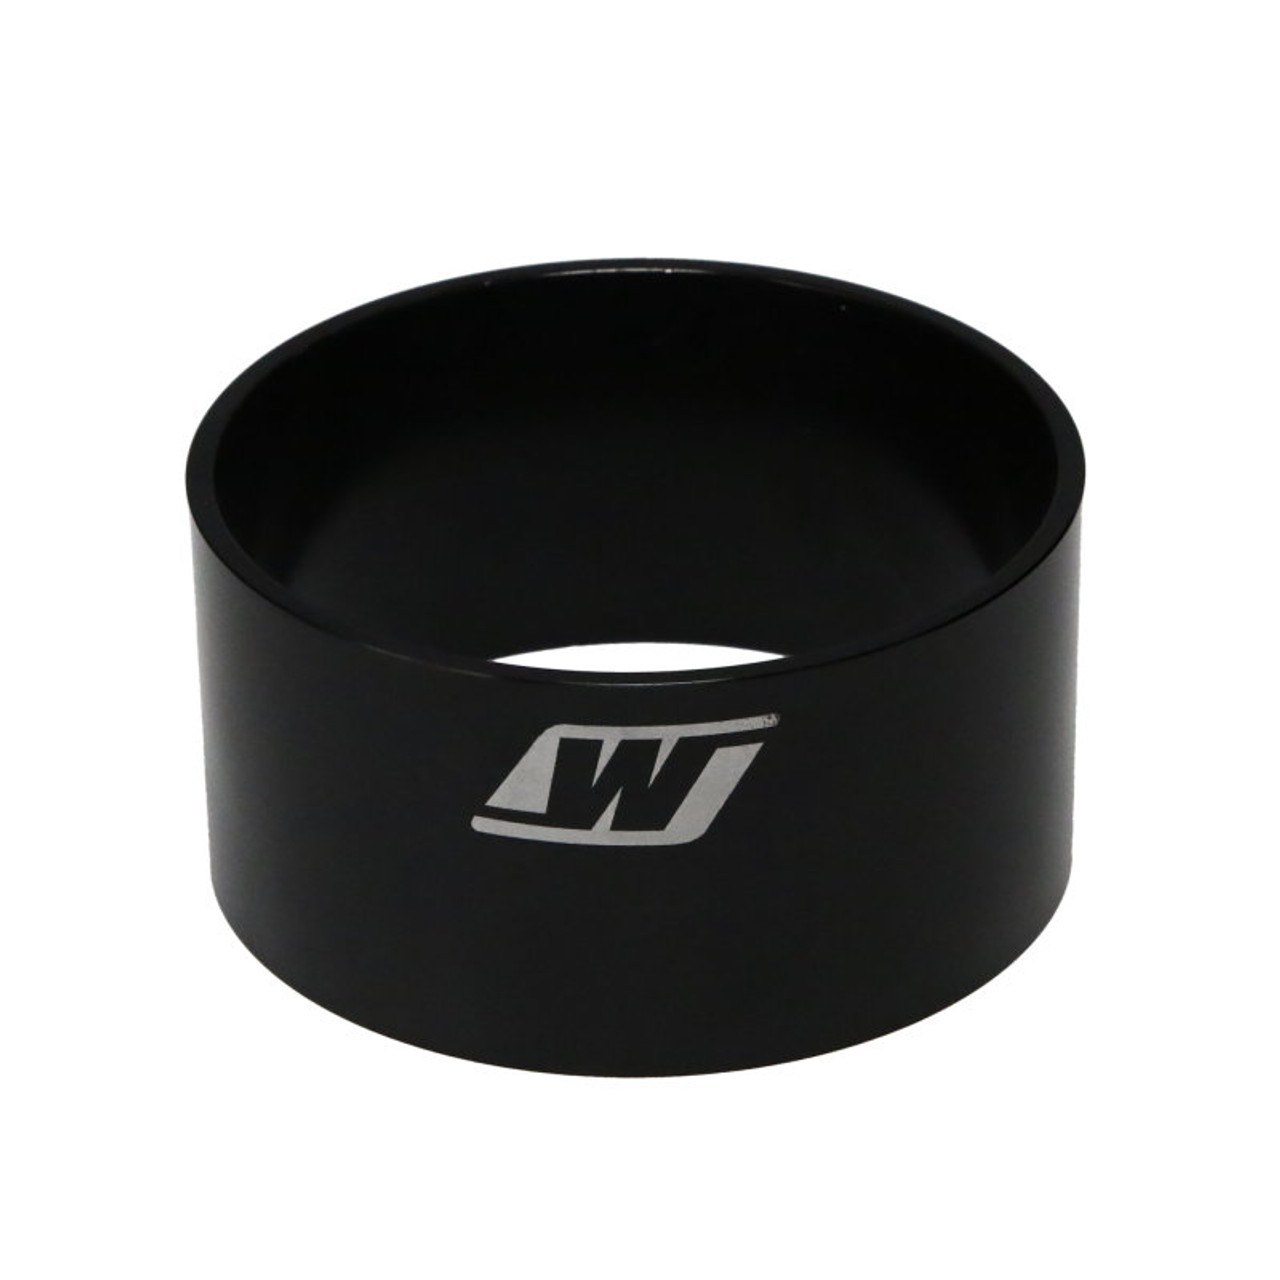 Wiseco 82.5mm Black Anodized Piston Ring Compressor Sleeve - RCS08250 Photo - Primary